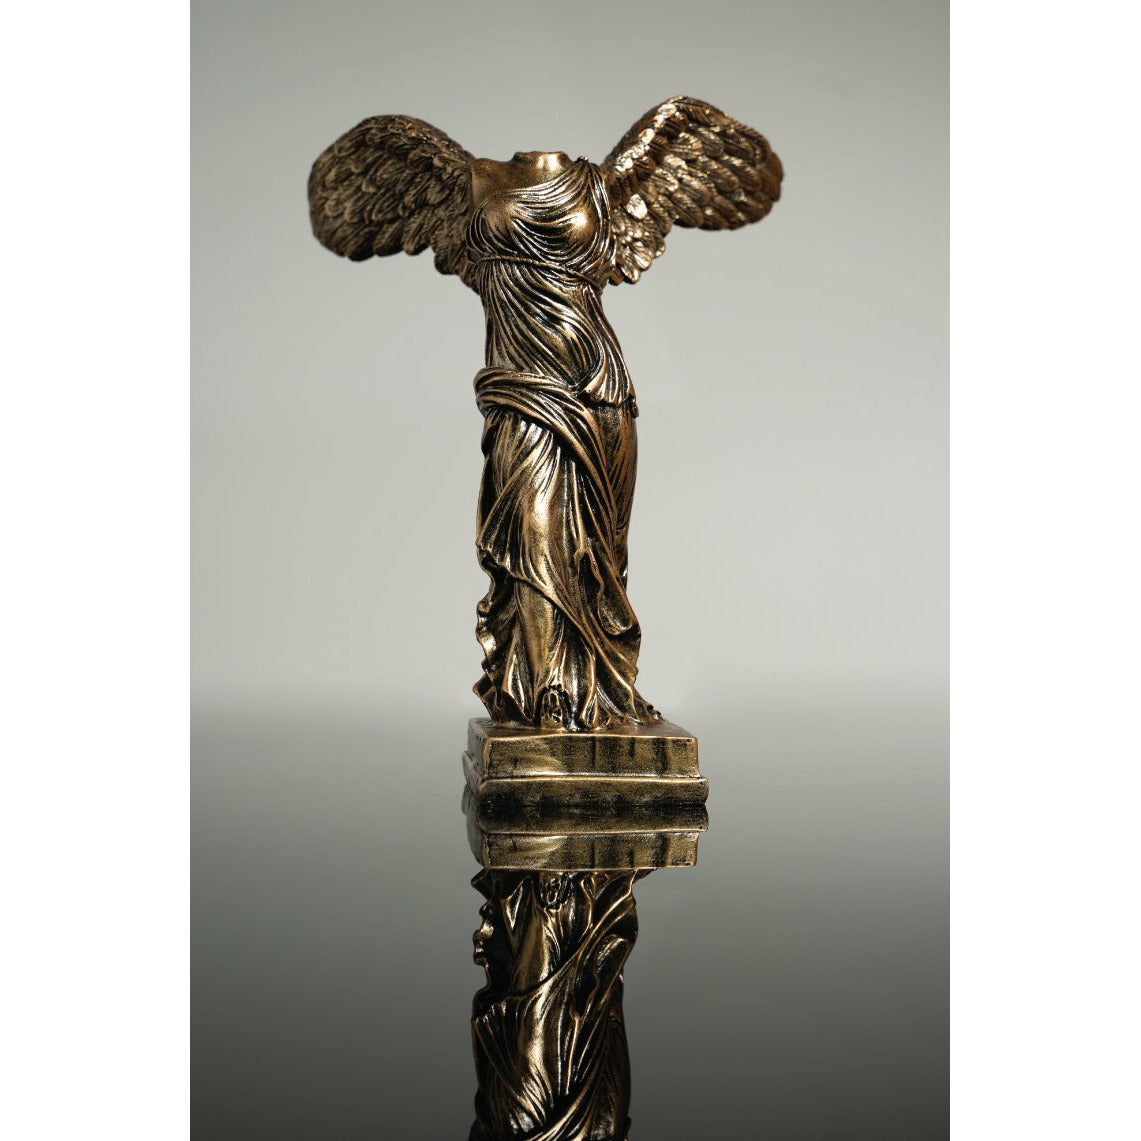 Brass Nike Sculpture - Our Brass Nike Sculpture is a timeless piece that’s an icon of Greek mythology. Nike is known to be the goddess of victory.